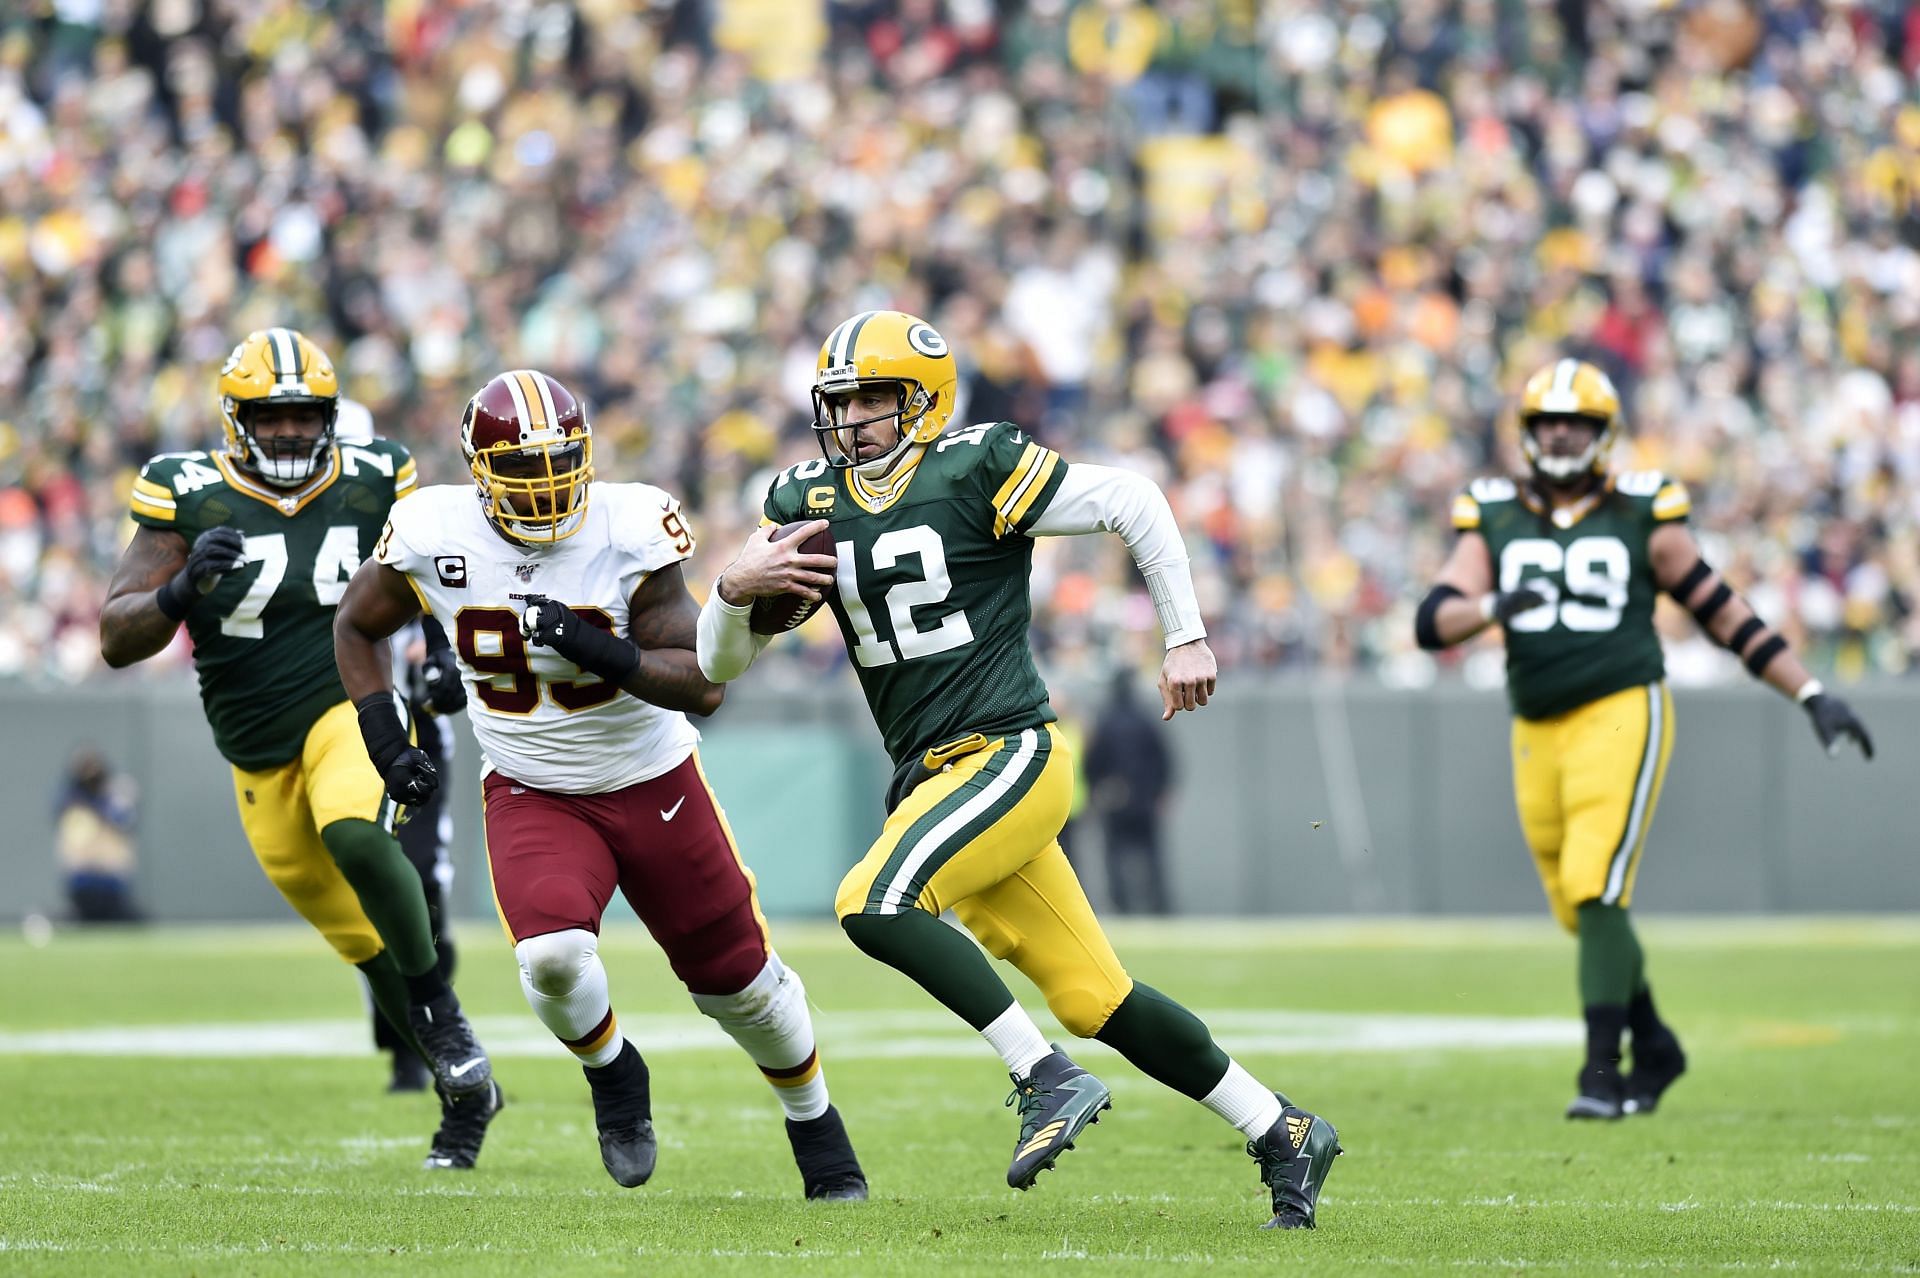 Aaron Rodgers in a rushing play against the Washington Football Team